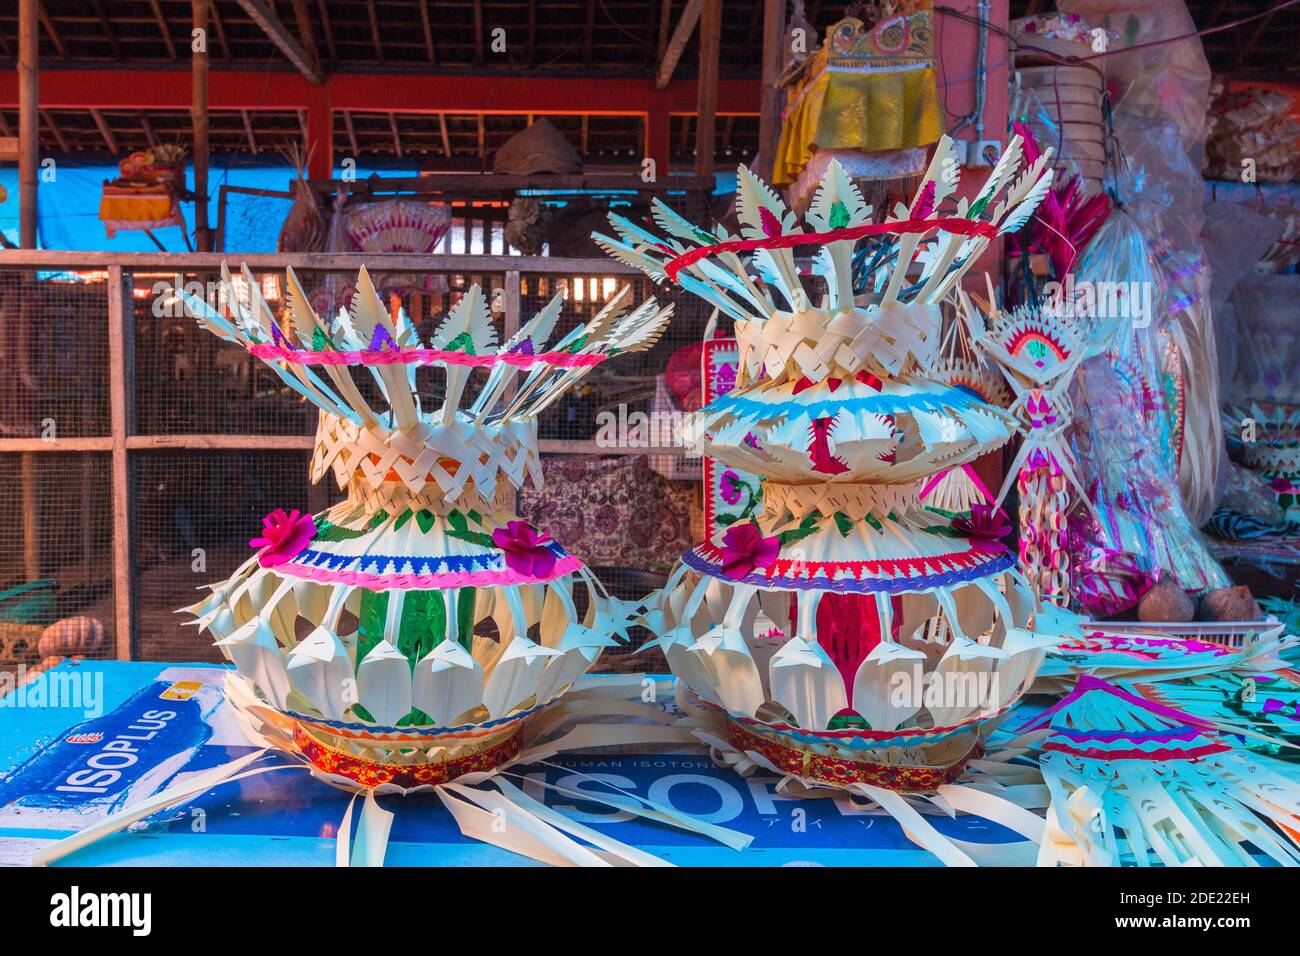 Balinese religious offerings at a market in Bali, Indonesia Stock Photo